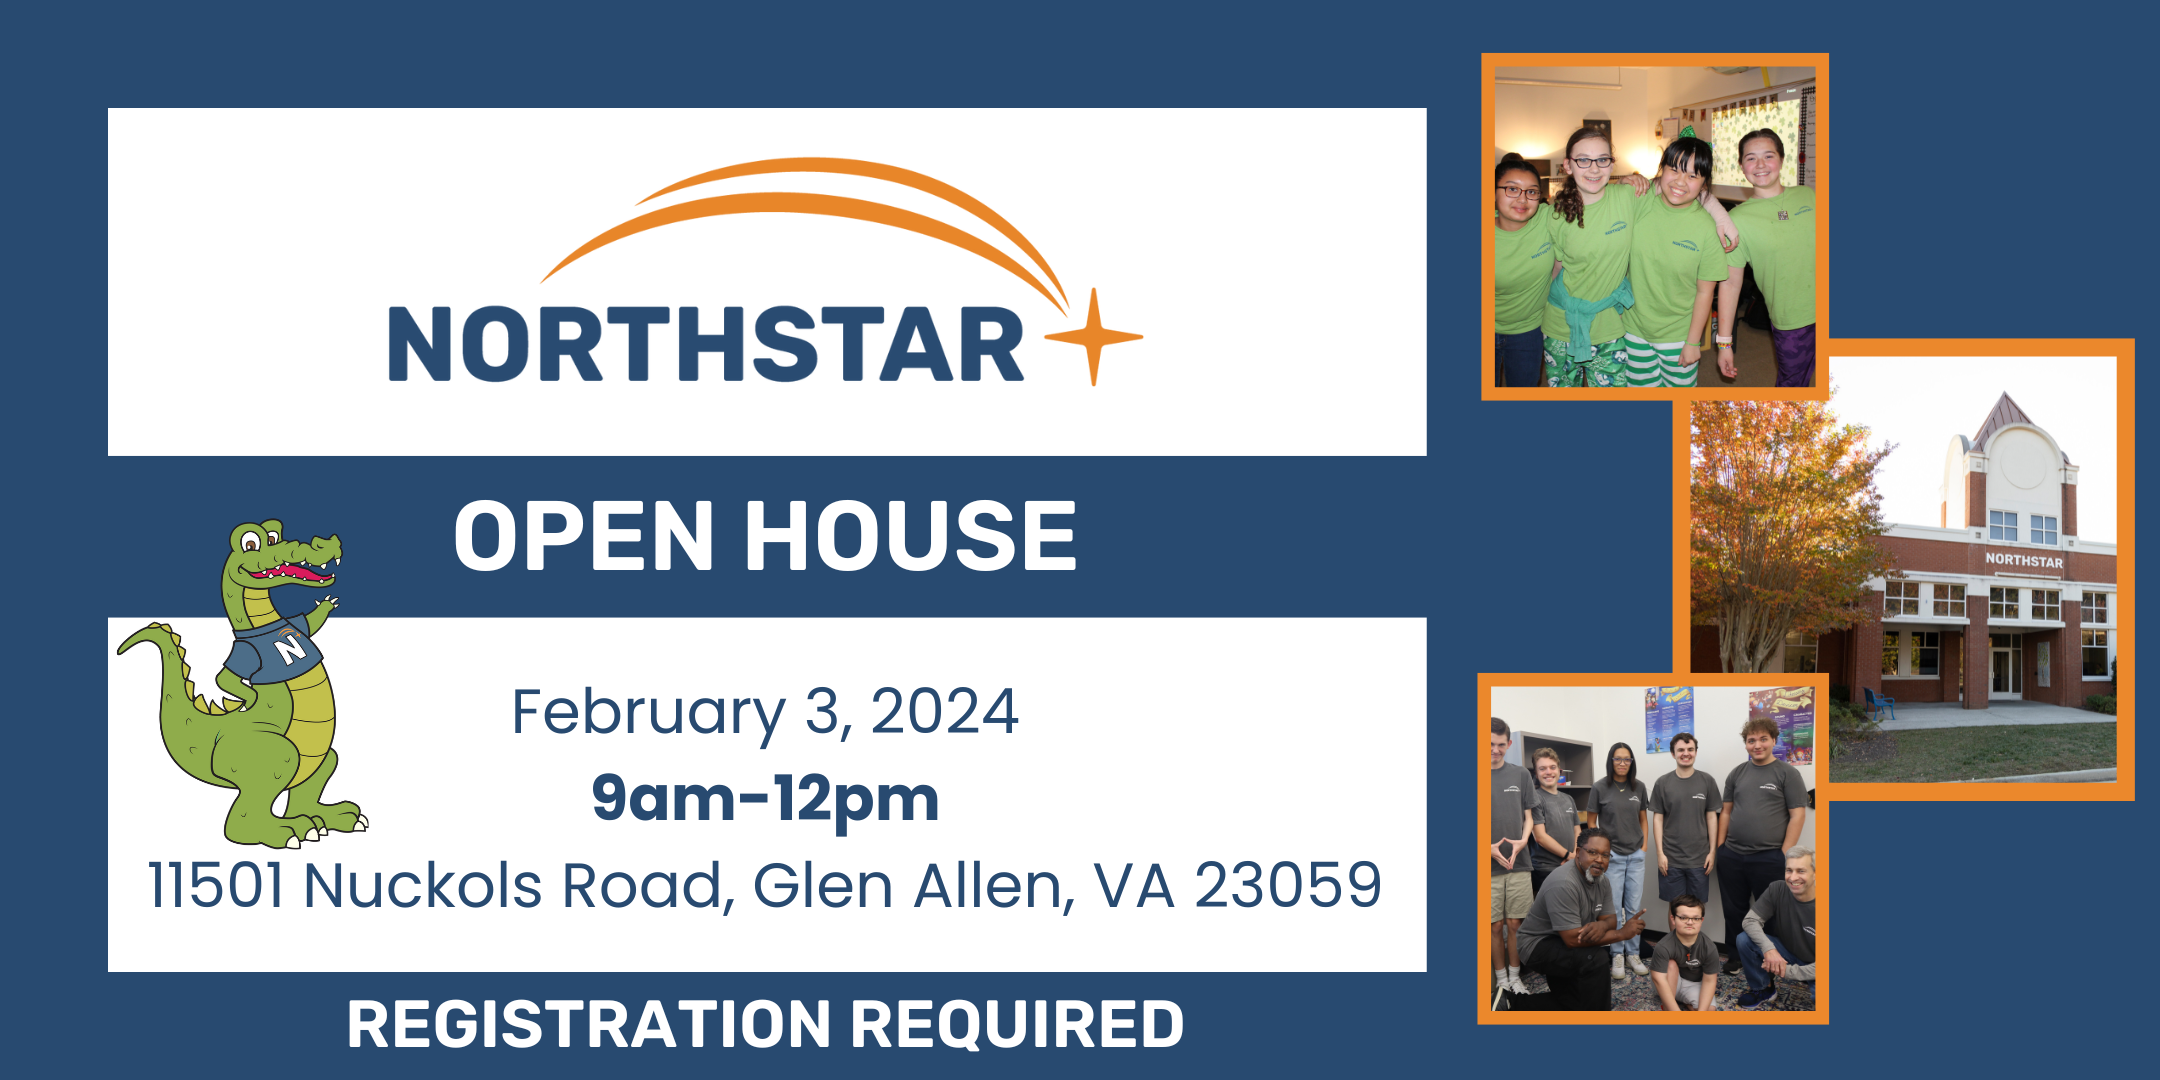 Northstar Open House February 3, 2024 from 9am to 12pm